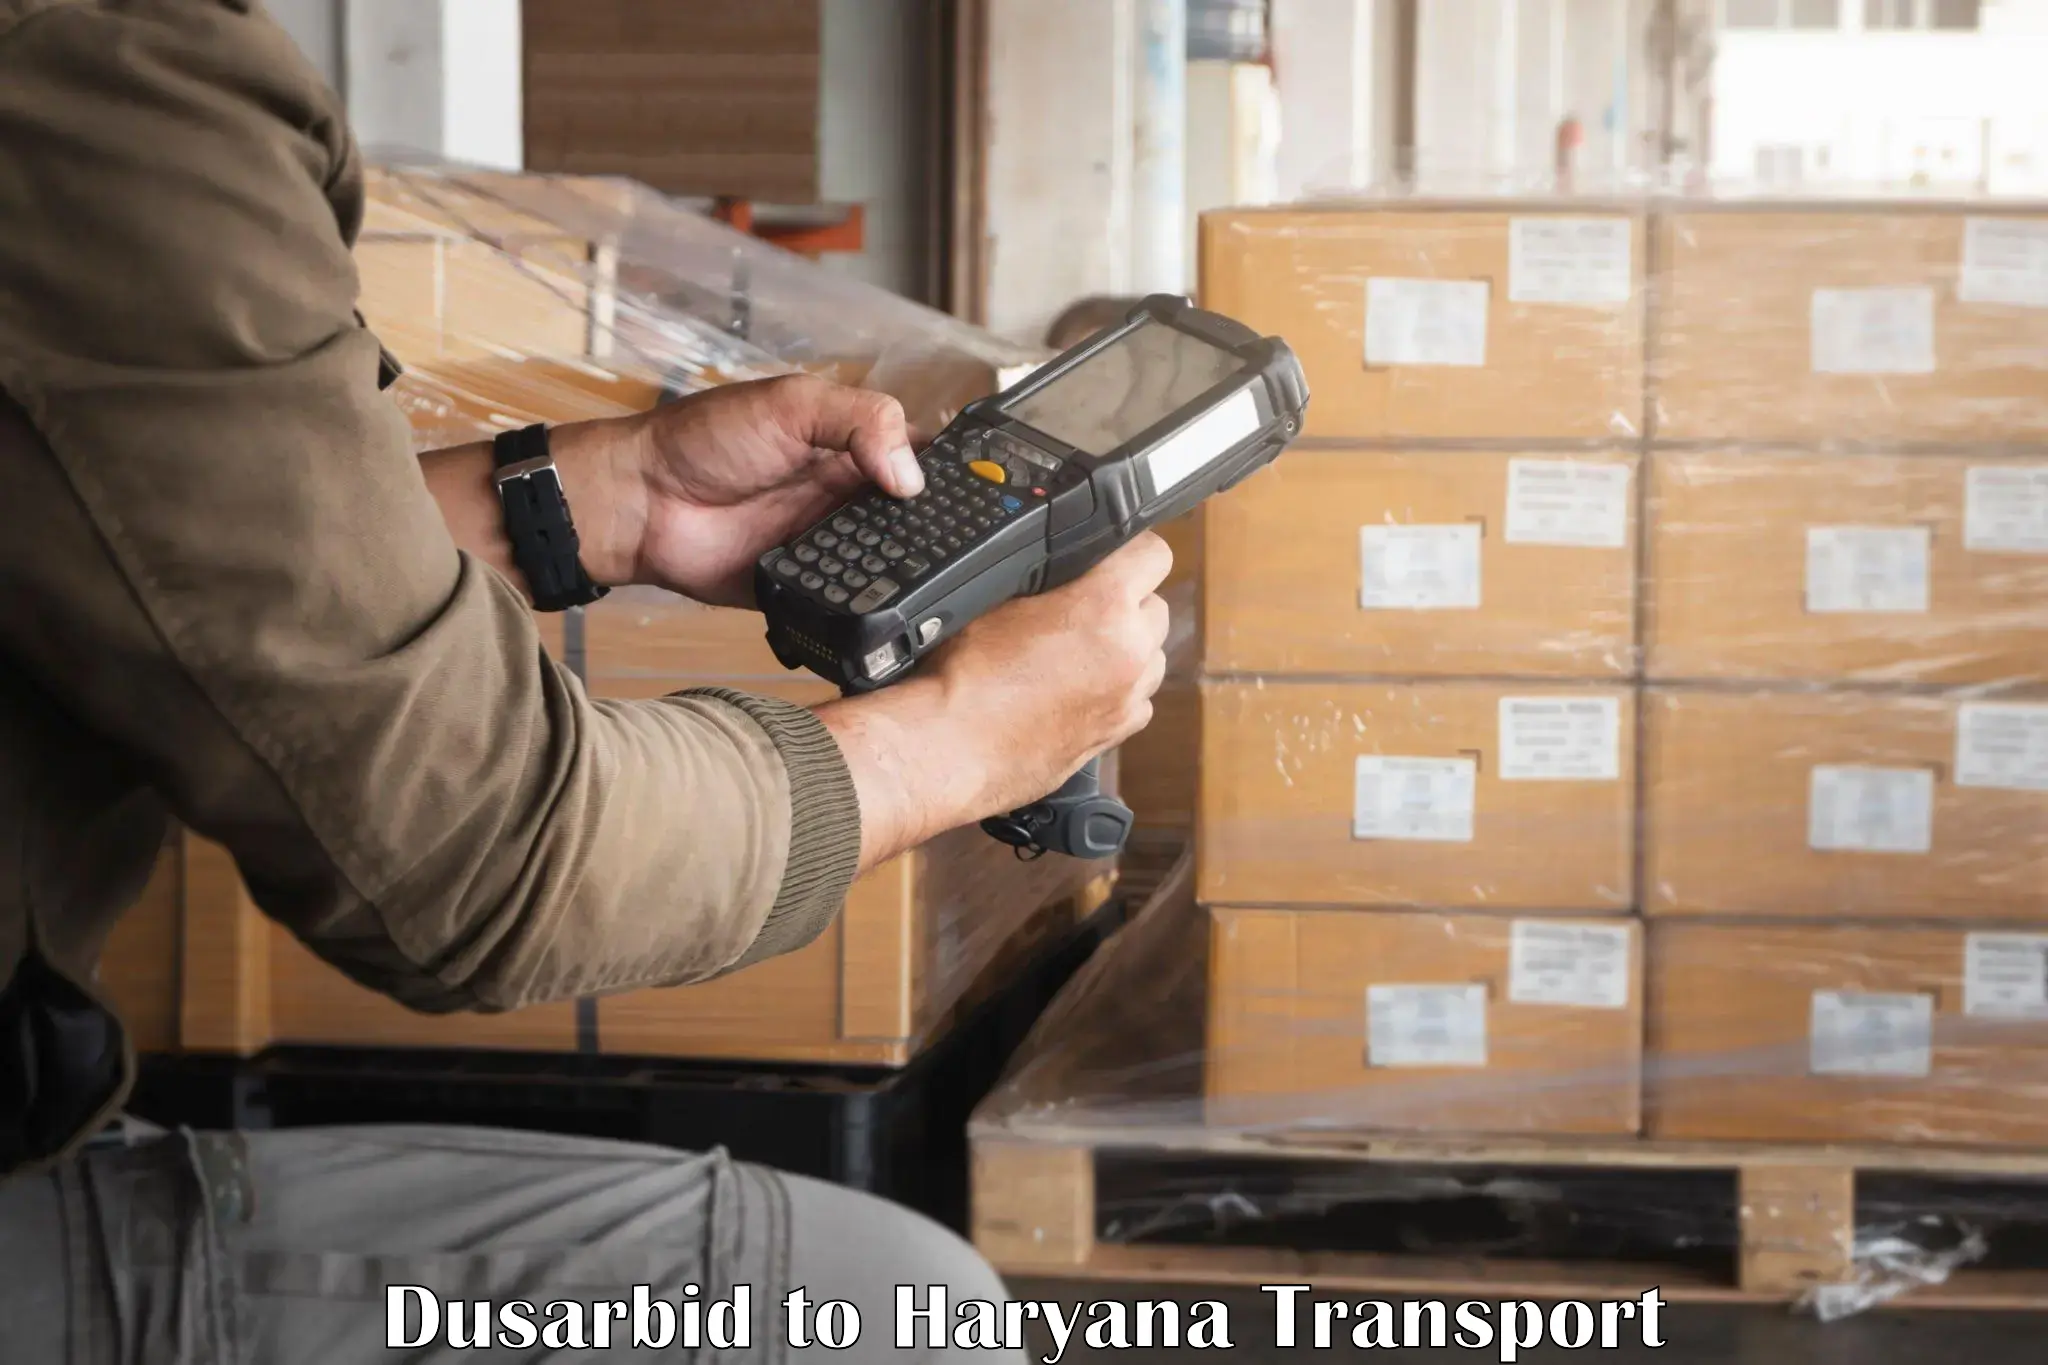 Express transport services in Dusarbid to Haryana